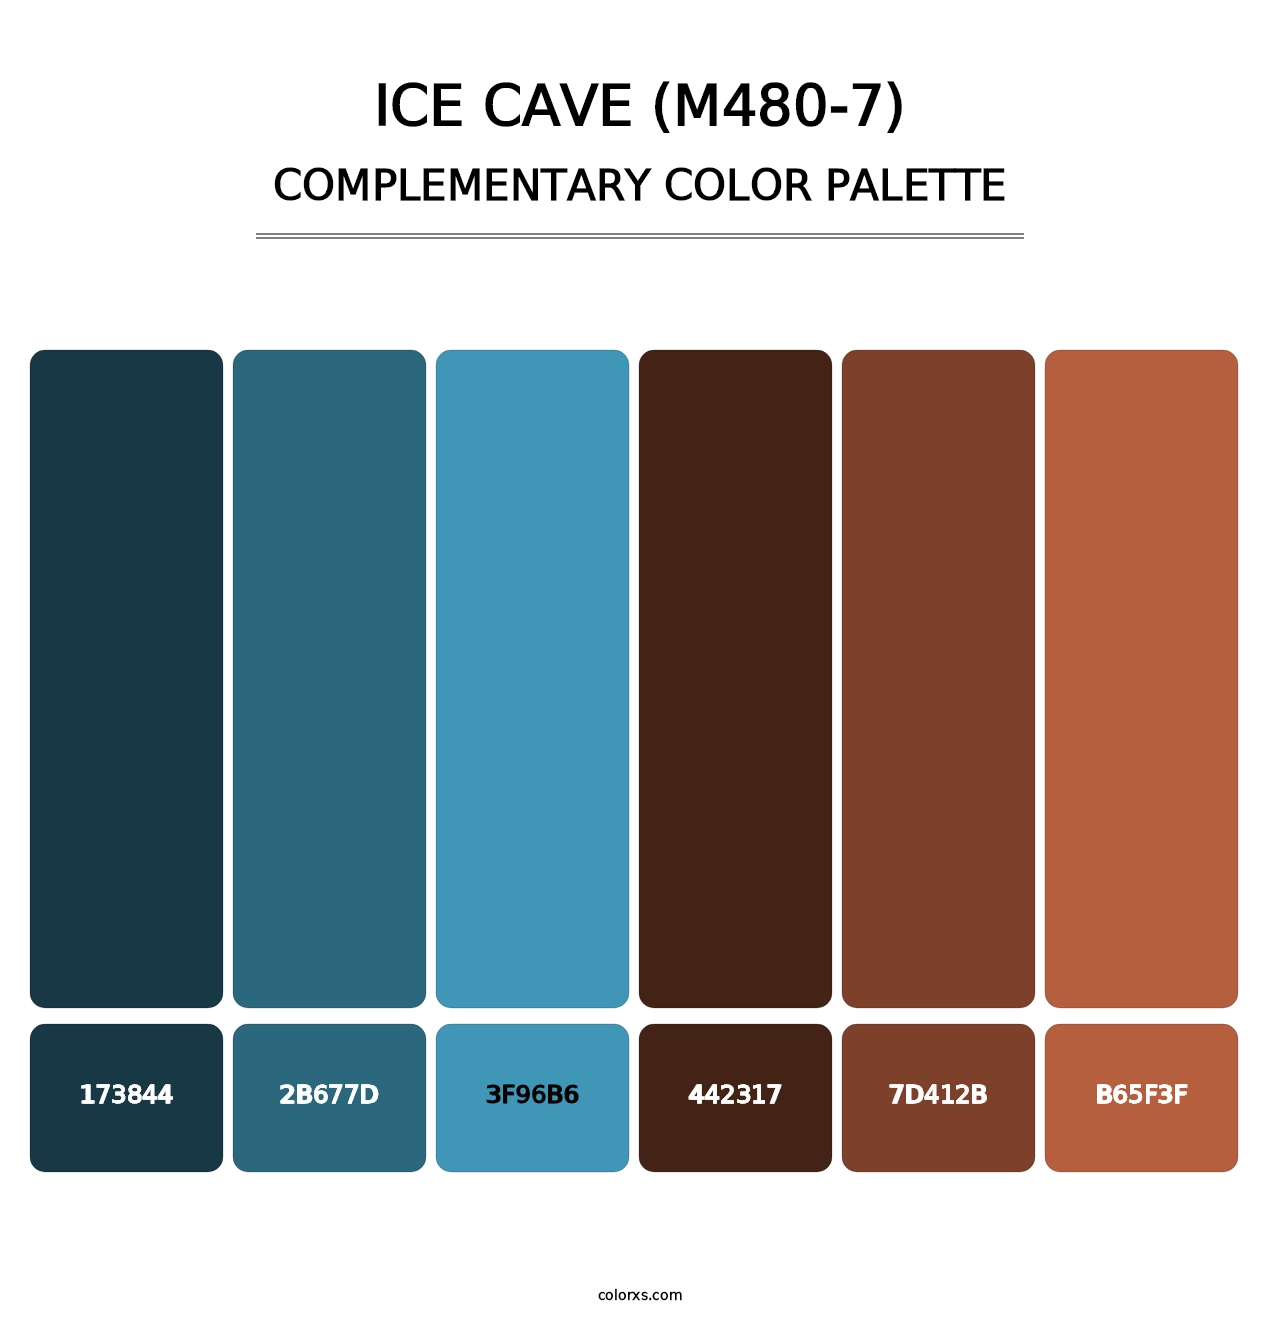 Ice Cave (M480-7) - Complementary Color Palette